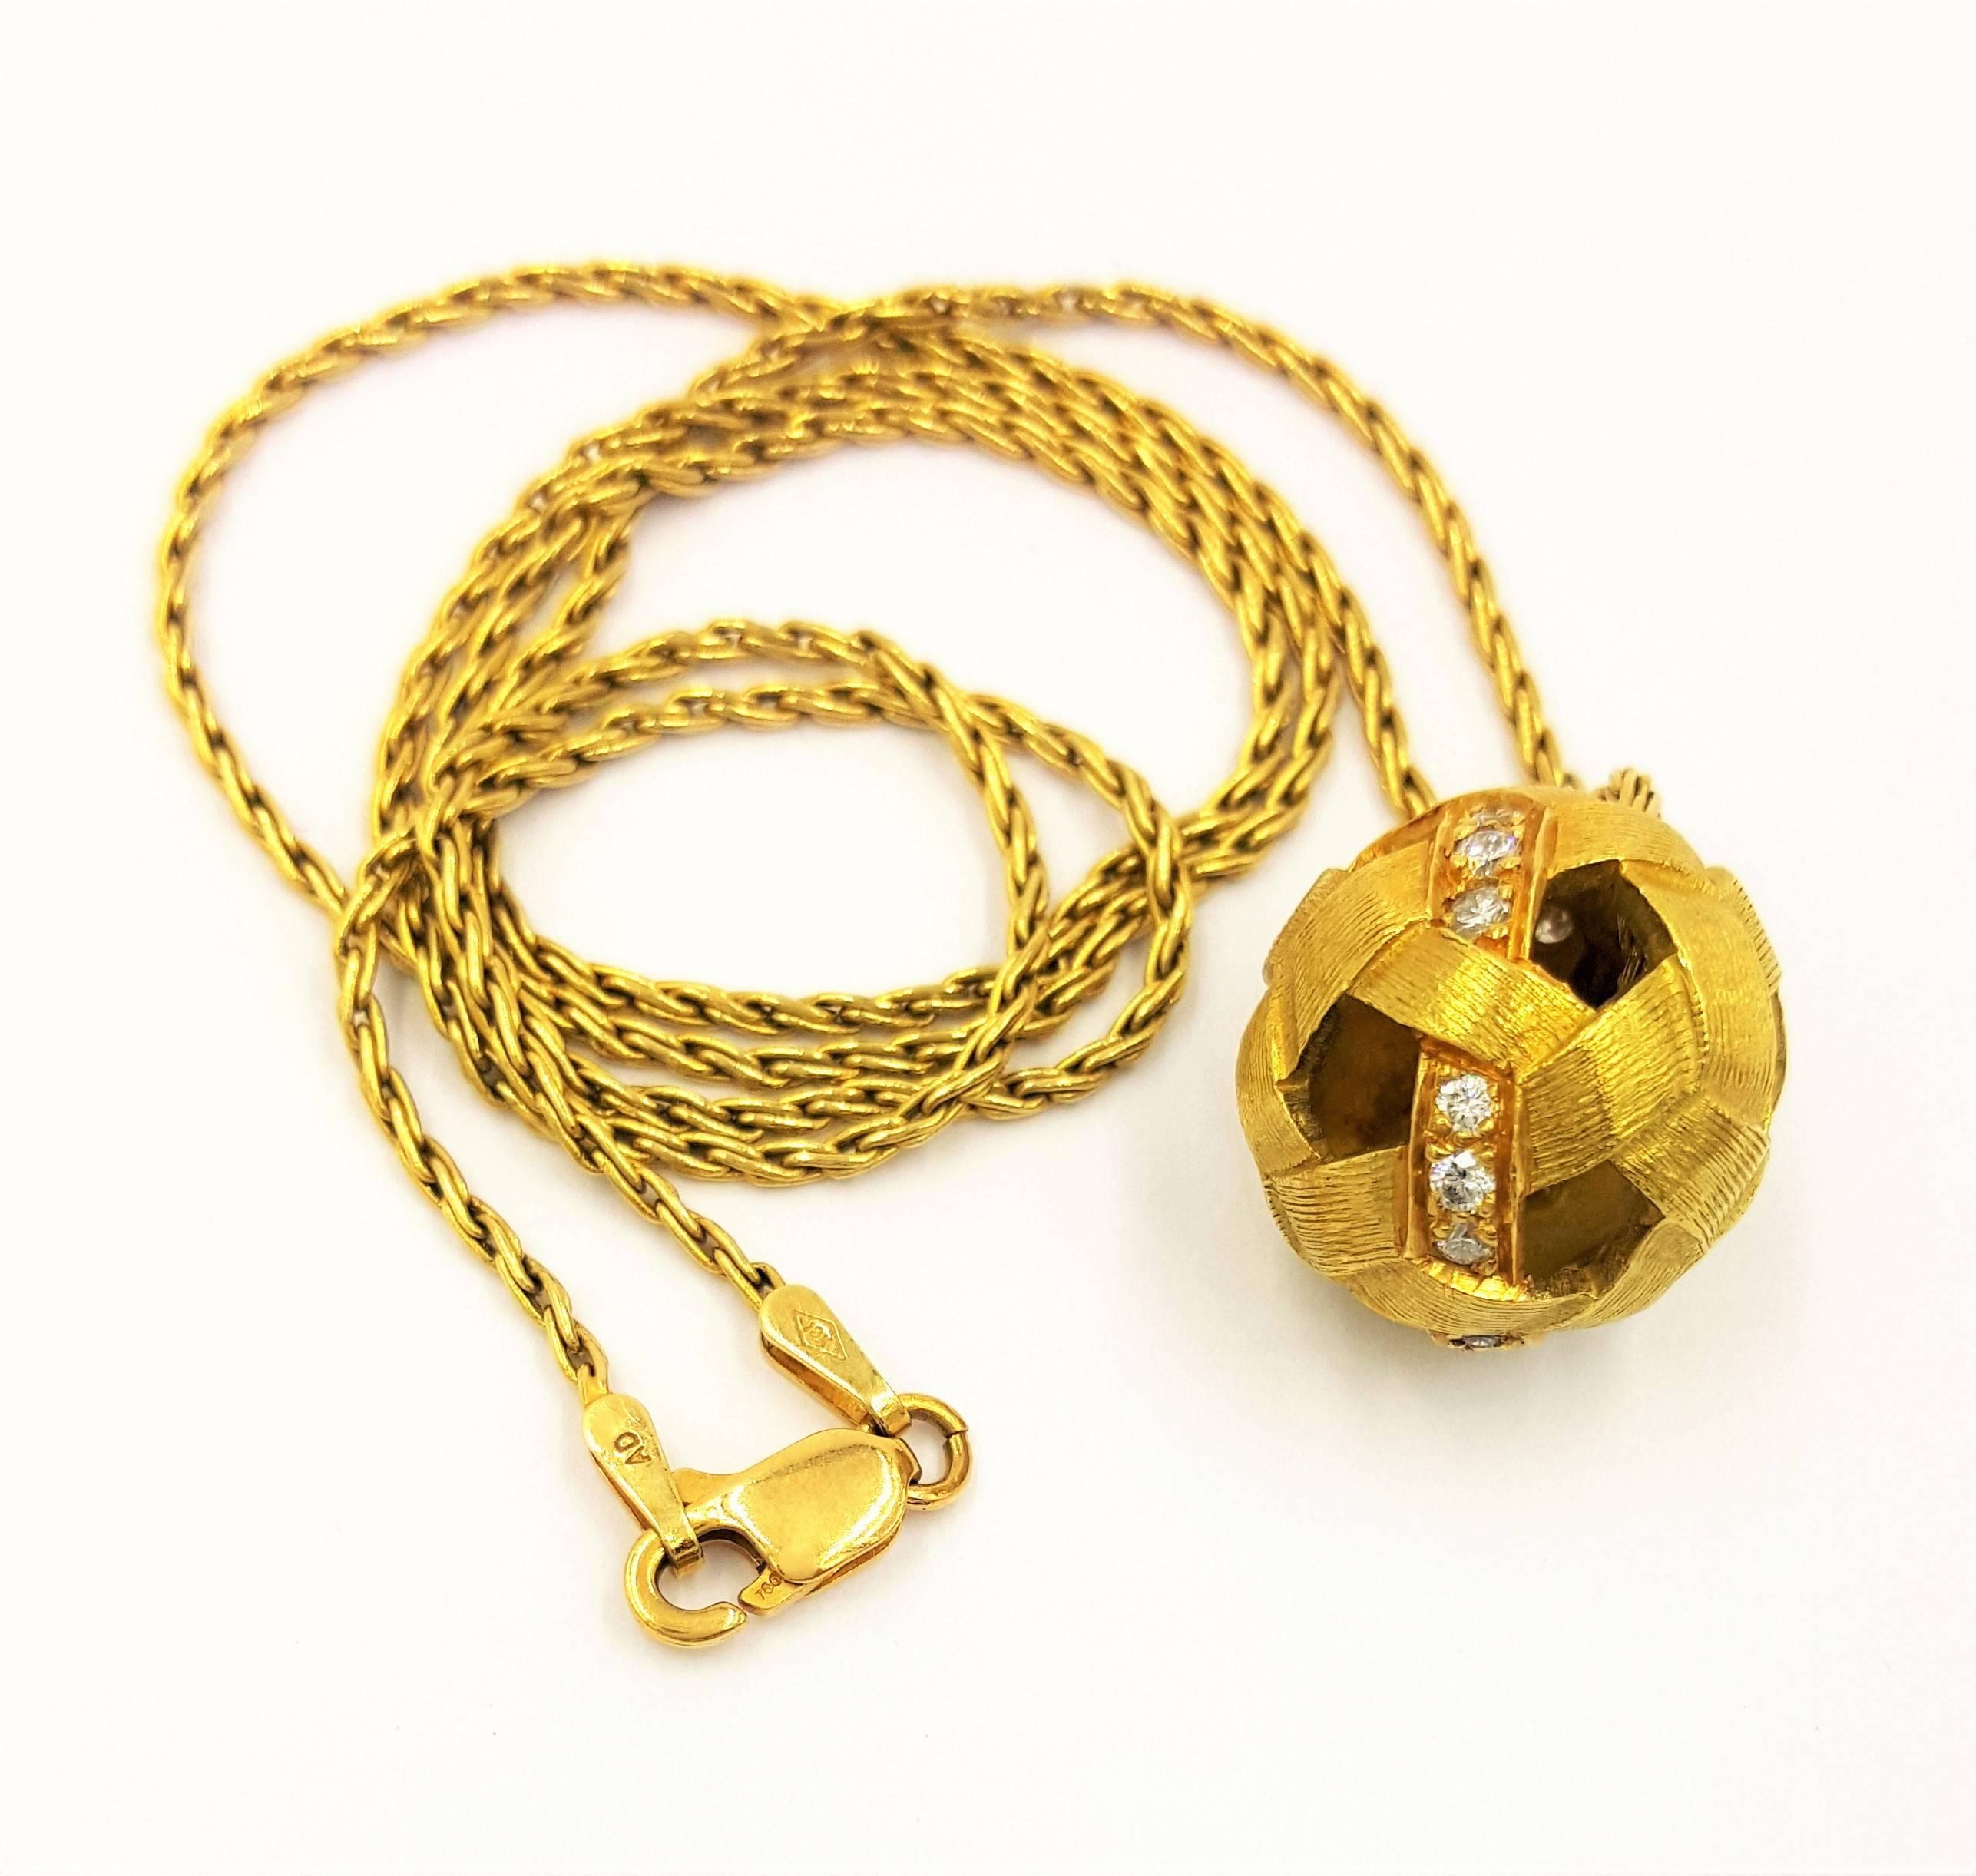 This gorgeous yet fun Soccer Ball Diamond Pendant and 18kt Necklace by French Designer Etienne Perret features .75 Carats of VS clarity, G white color diamonds set in a textured 18kt yellow gold soccer ball and is fun and perfect for everyone,